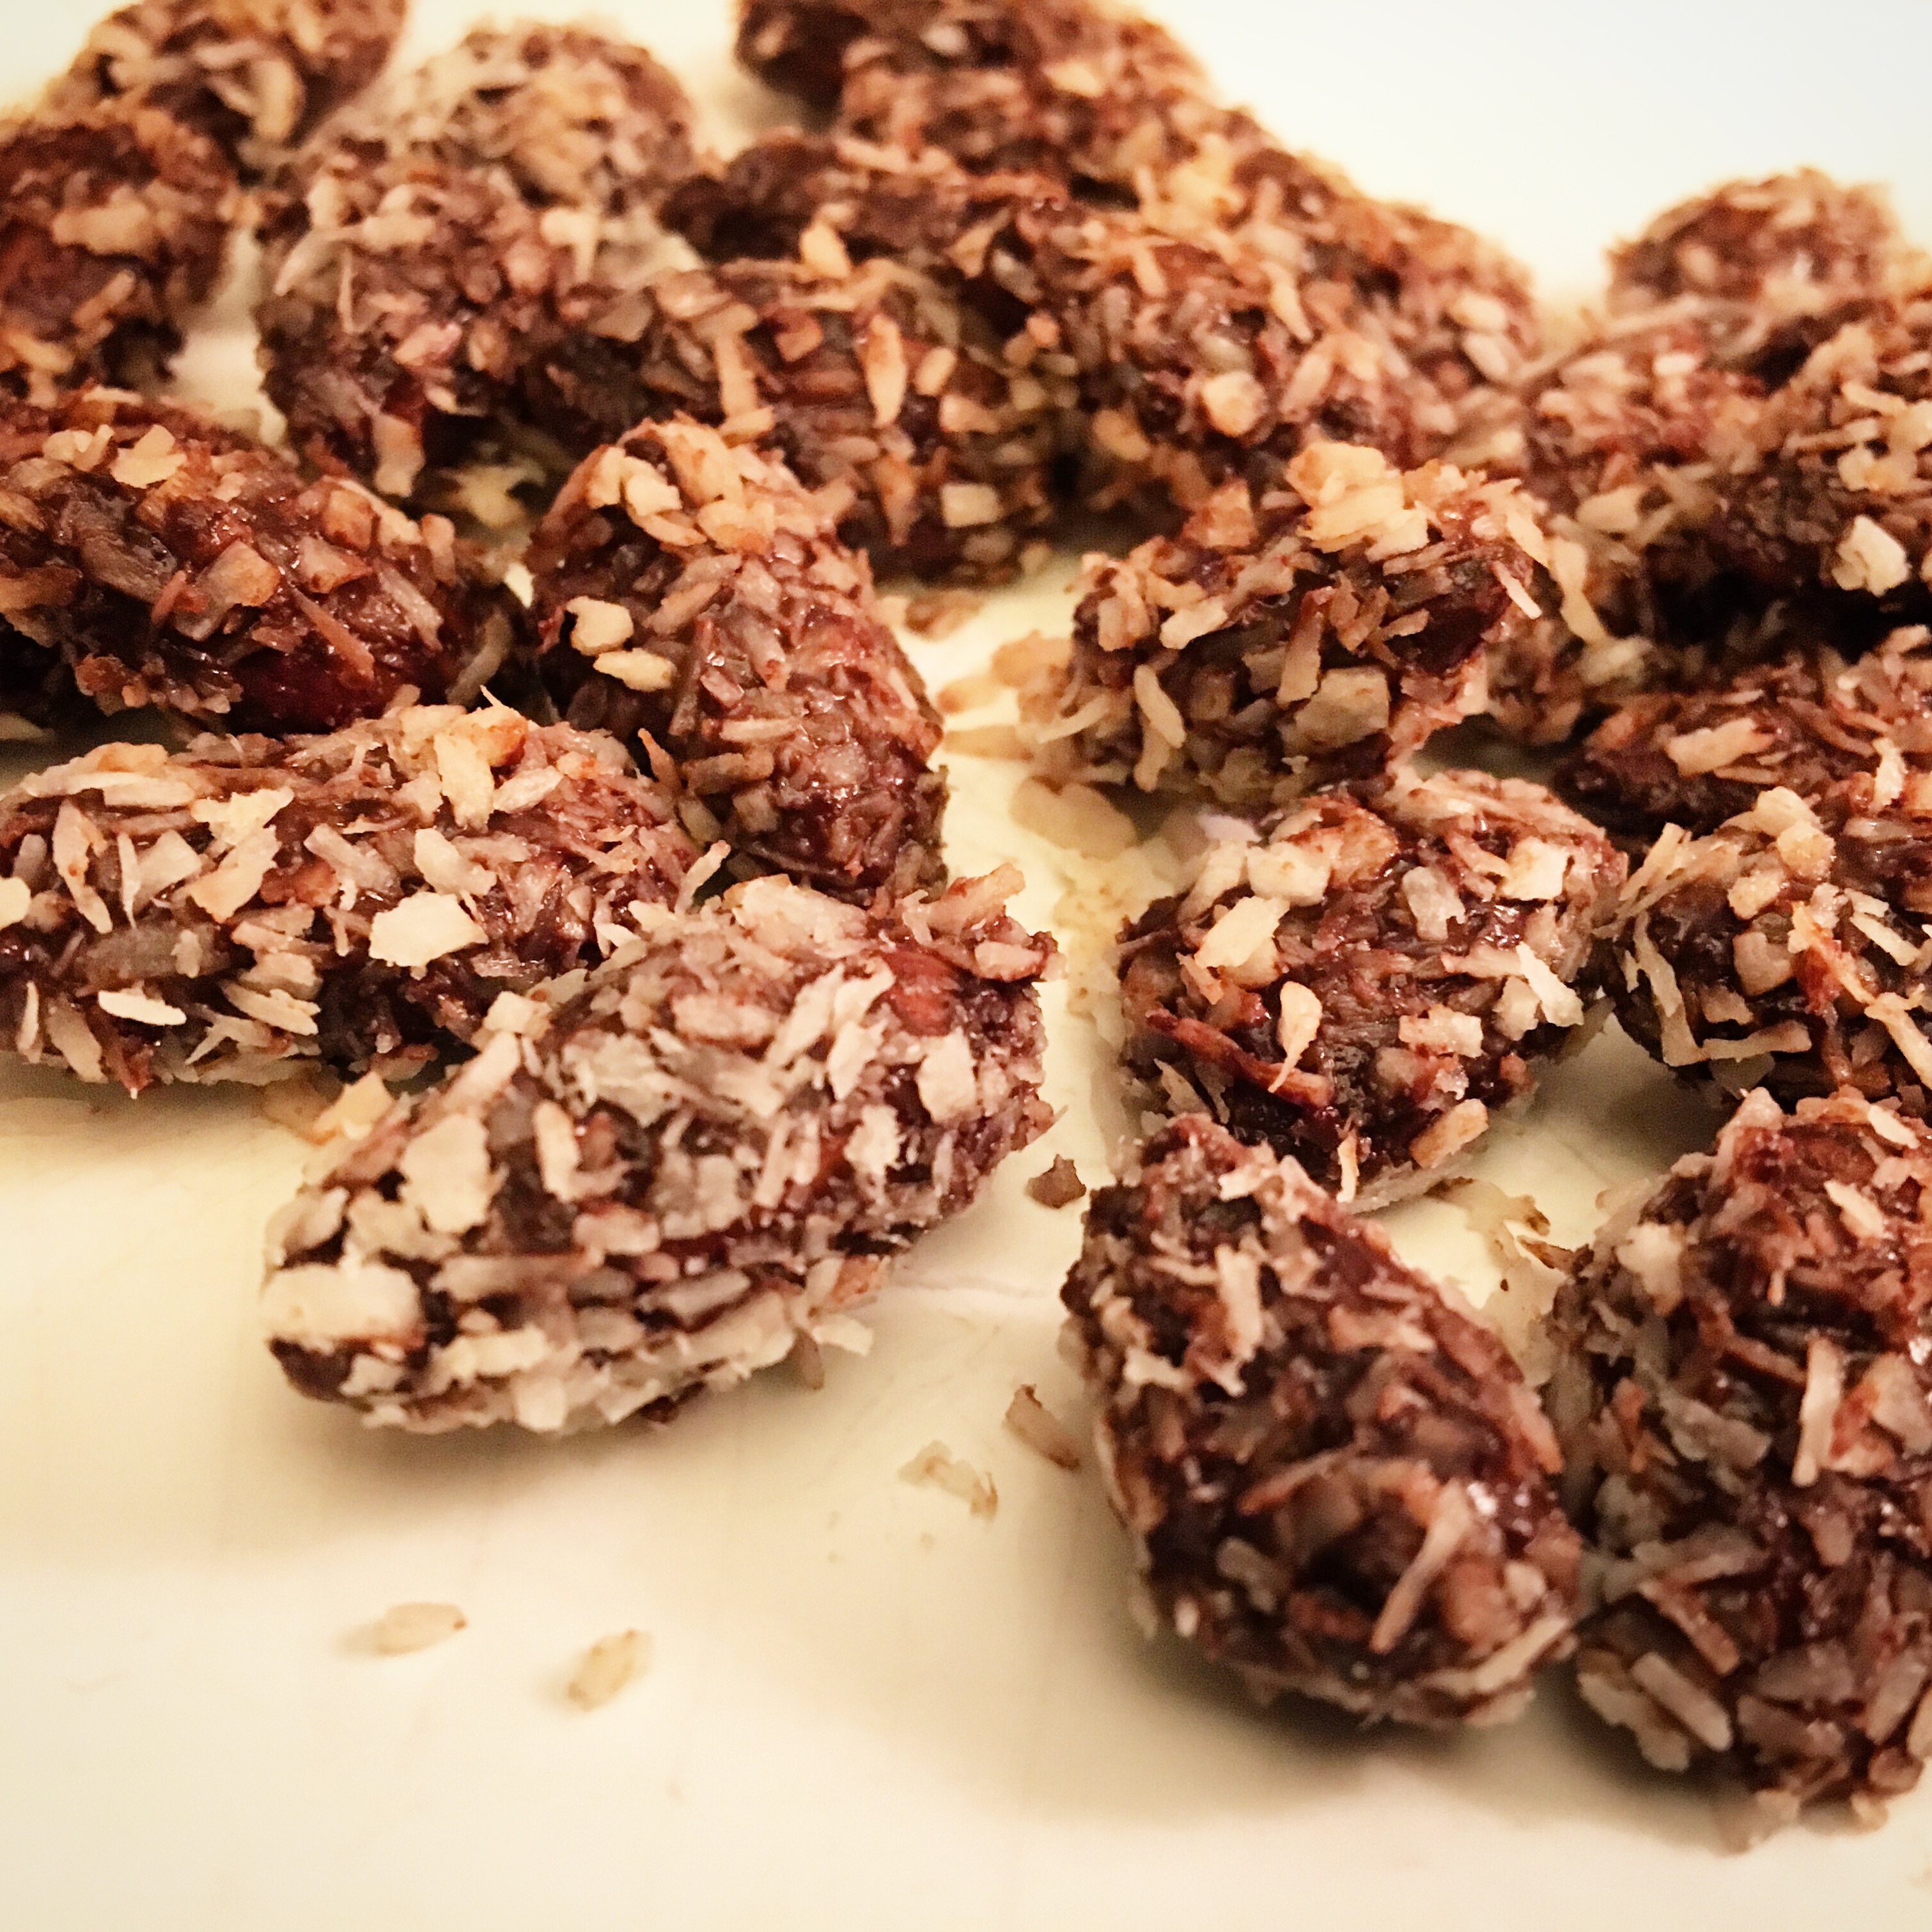 Recipe: Sugar Free Chocolate and Coconut Covered Toasted Almonds